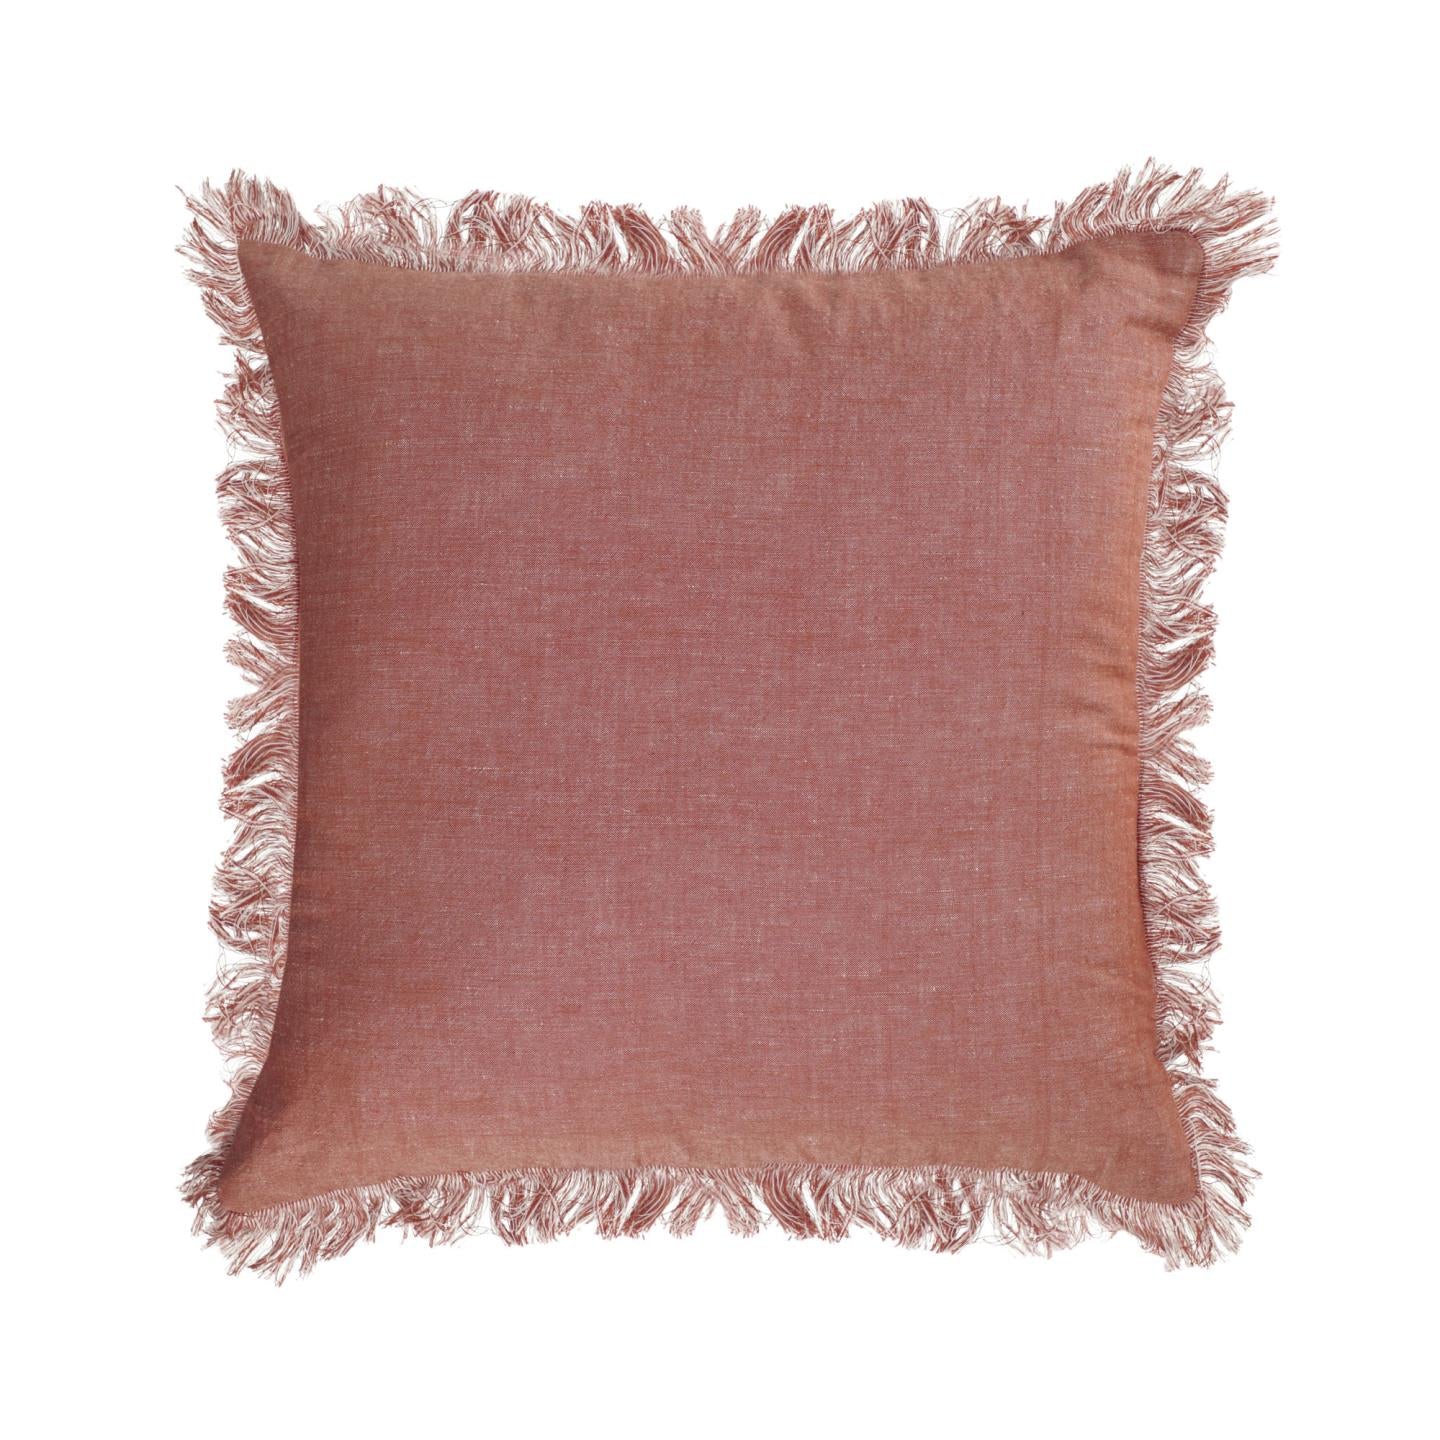 Abinadi terracotta cotton and linen cushion cover with fringe 45 x 45 cm